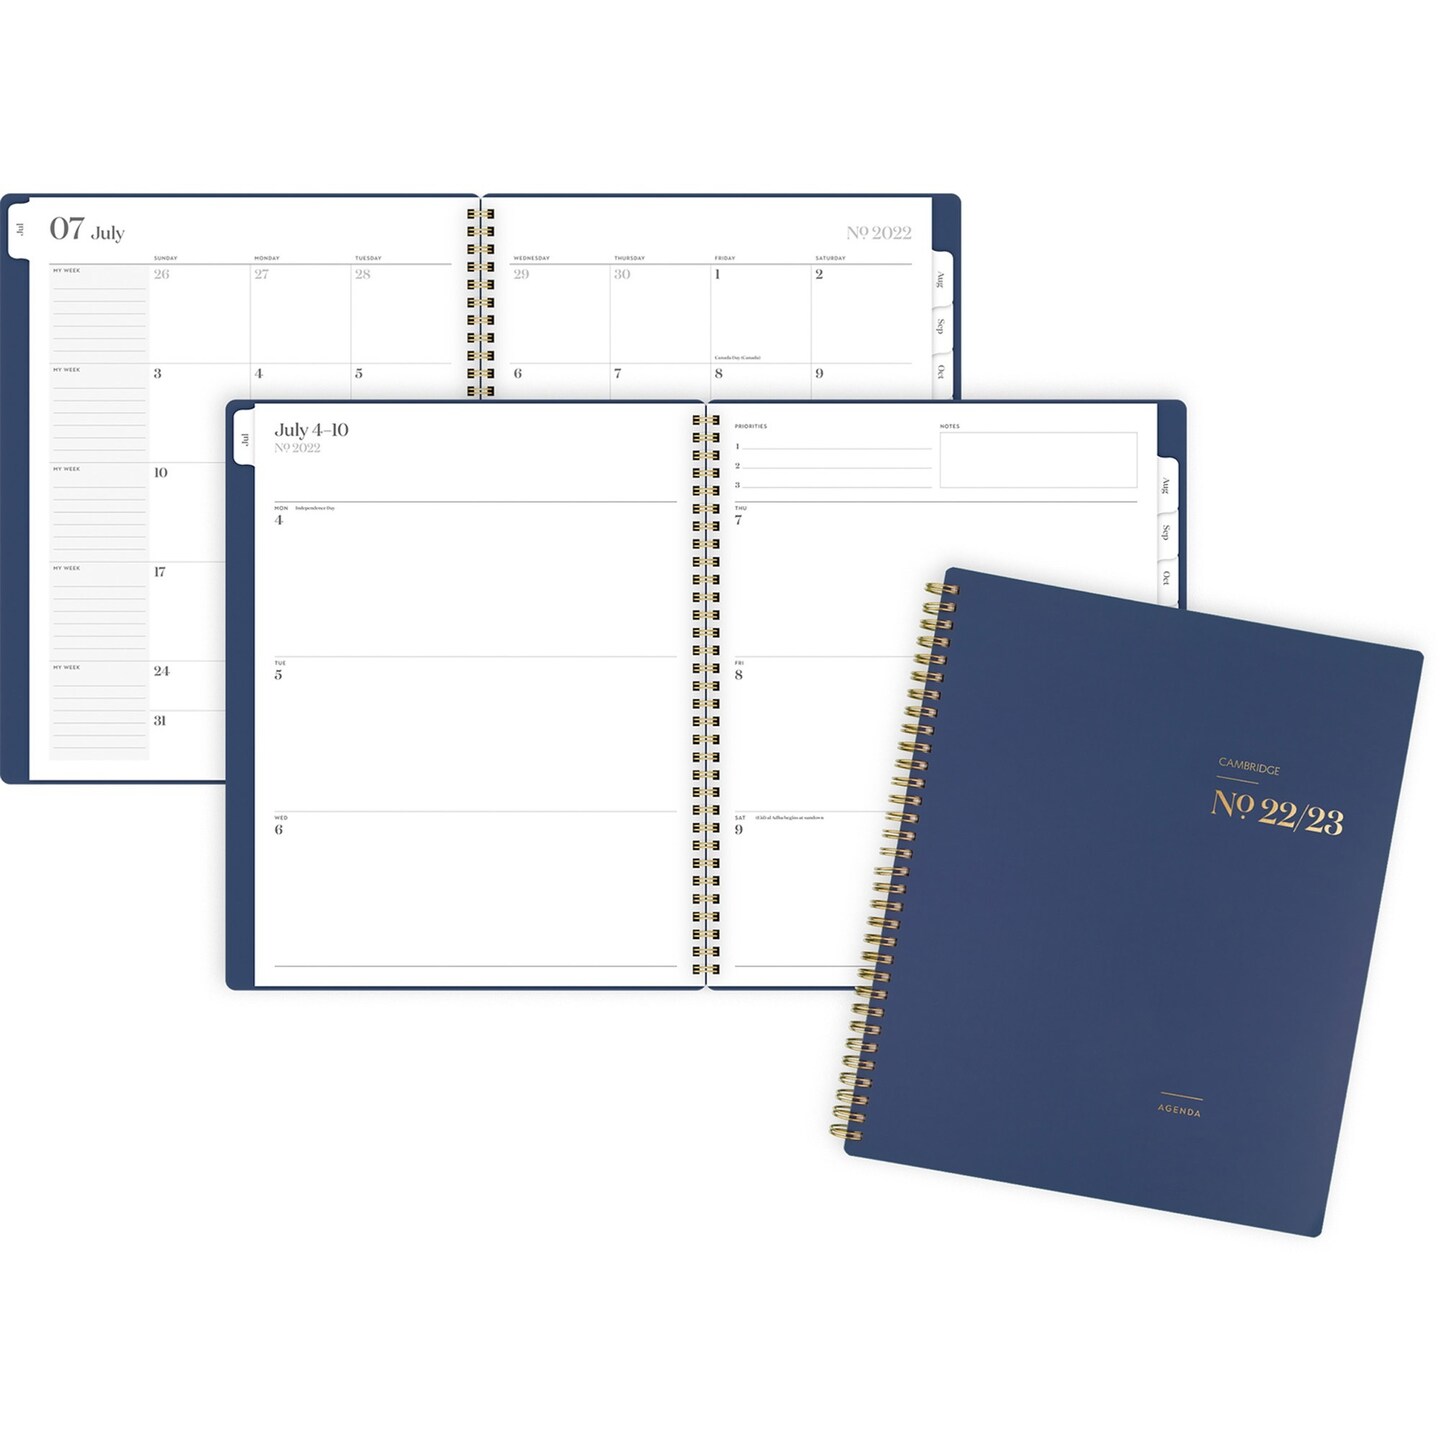 Cambridge WorkStyle Planner - Large Size - Academic - Weekly, Monthly - 12 Month - July till June